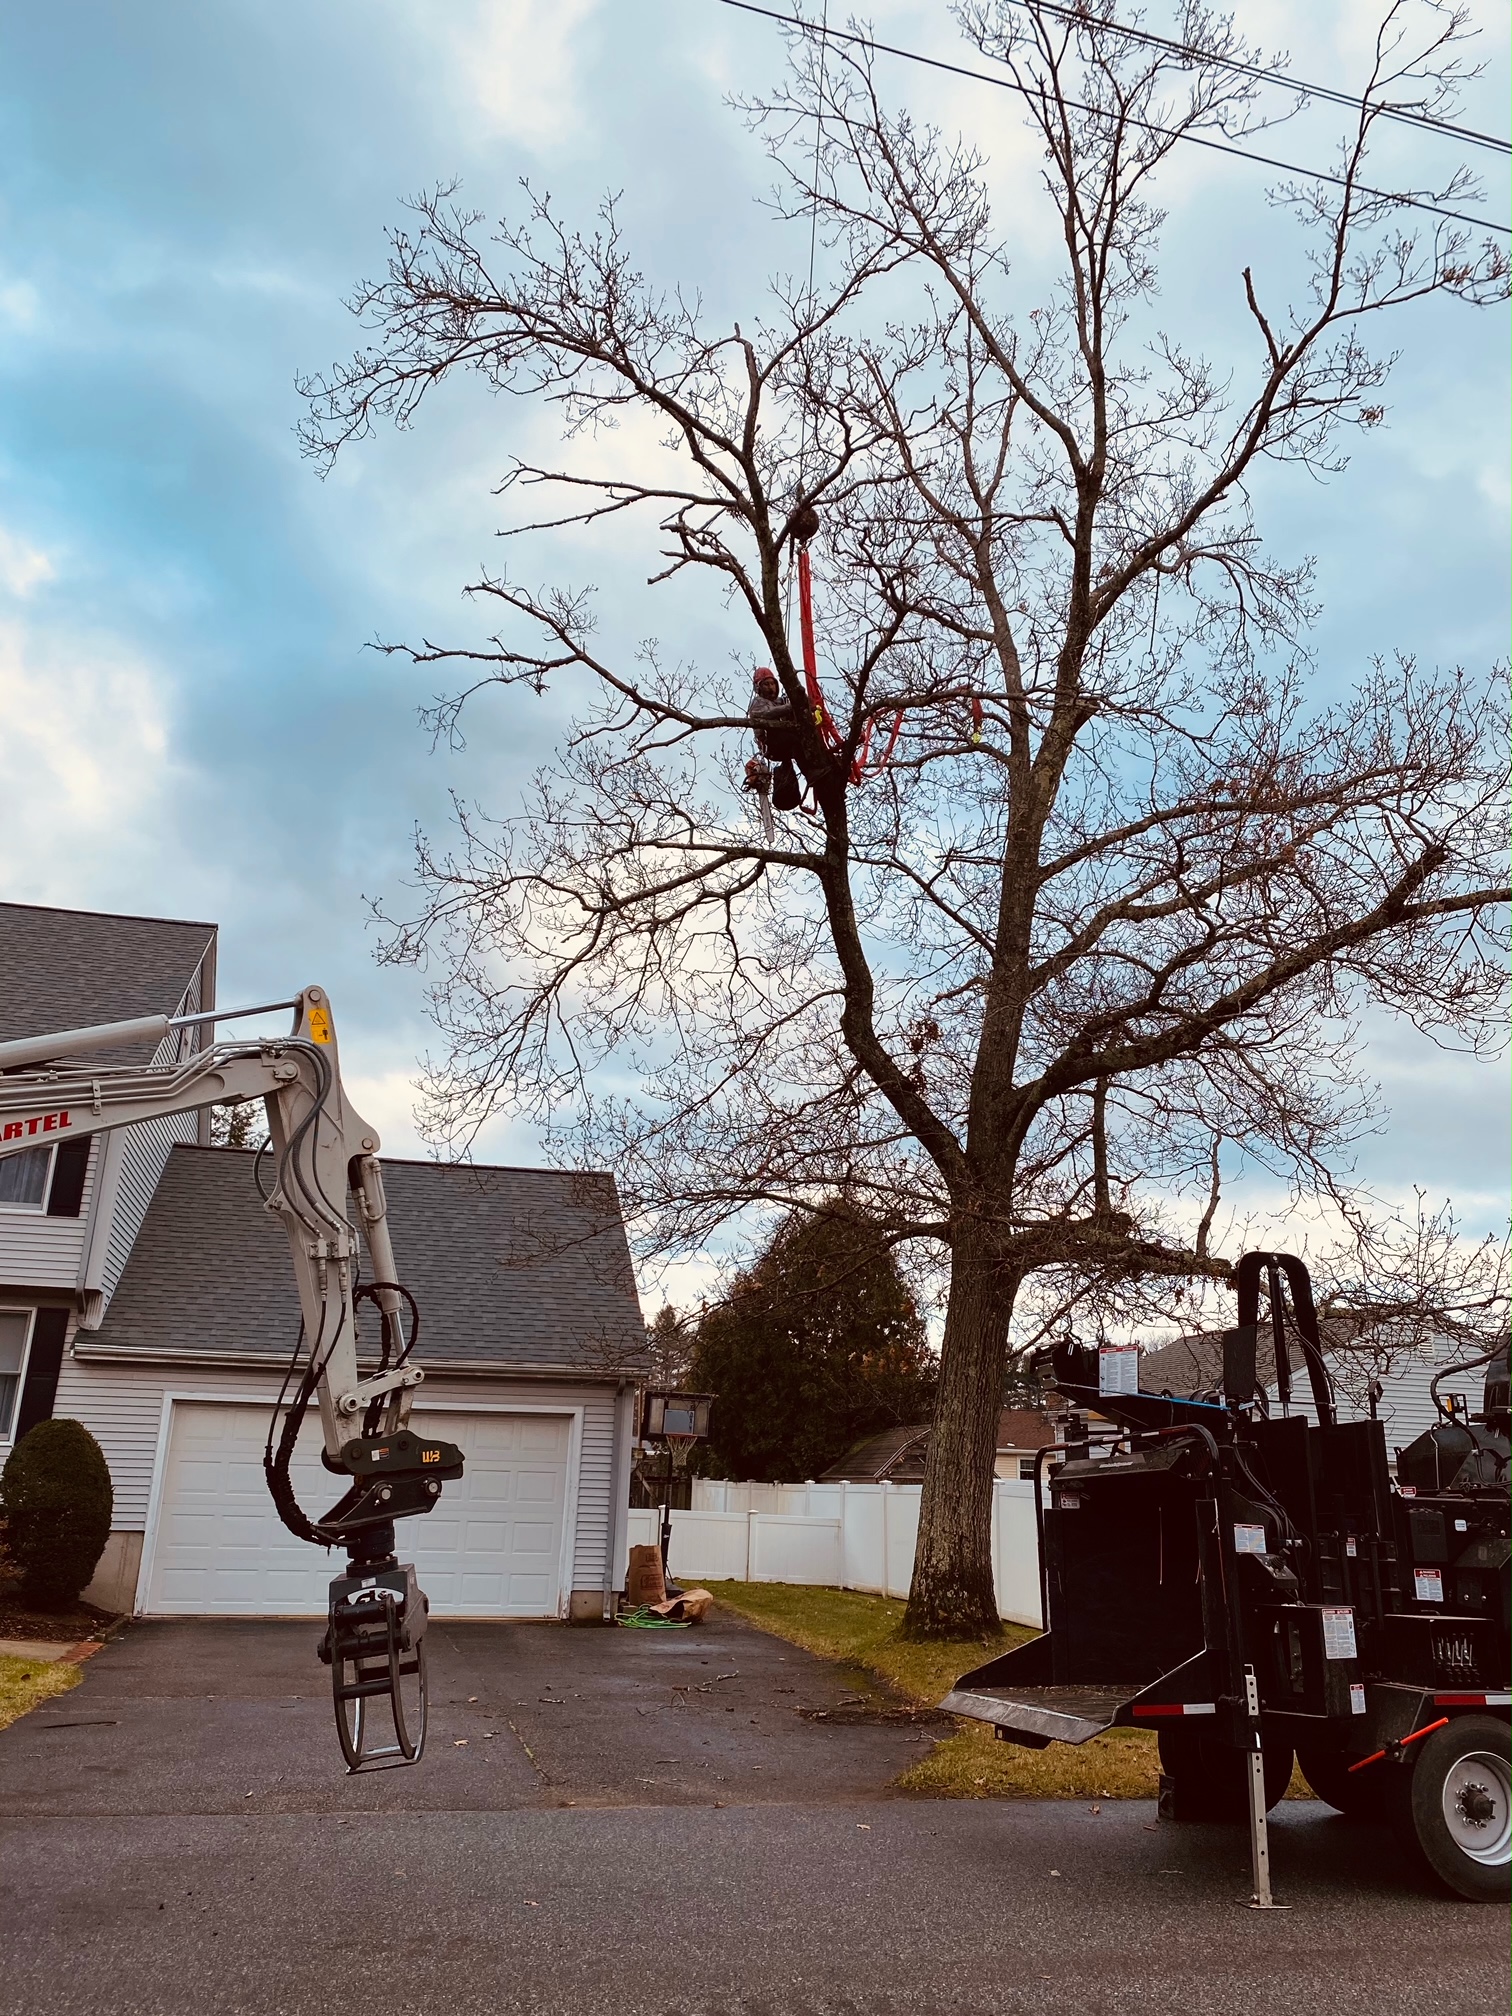 Tree Removal and Crane Rental in Tewksbury and Chelmsford, MA.